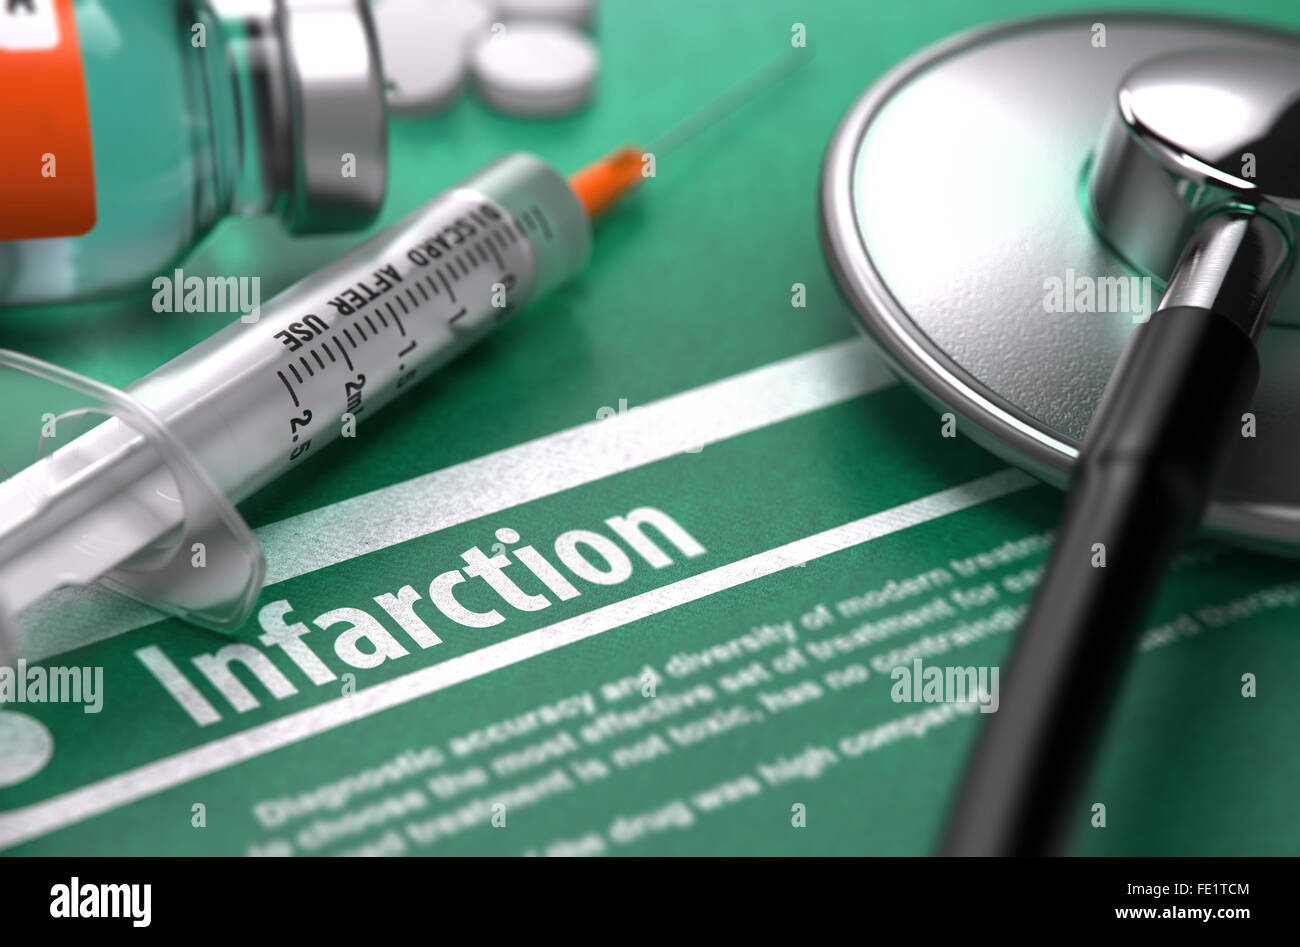 Infarction. Medical Concept on Green Background. Stock Photo